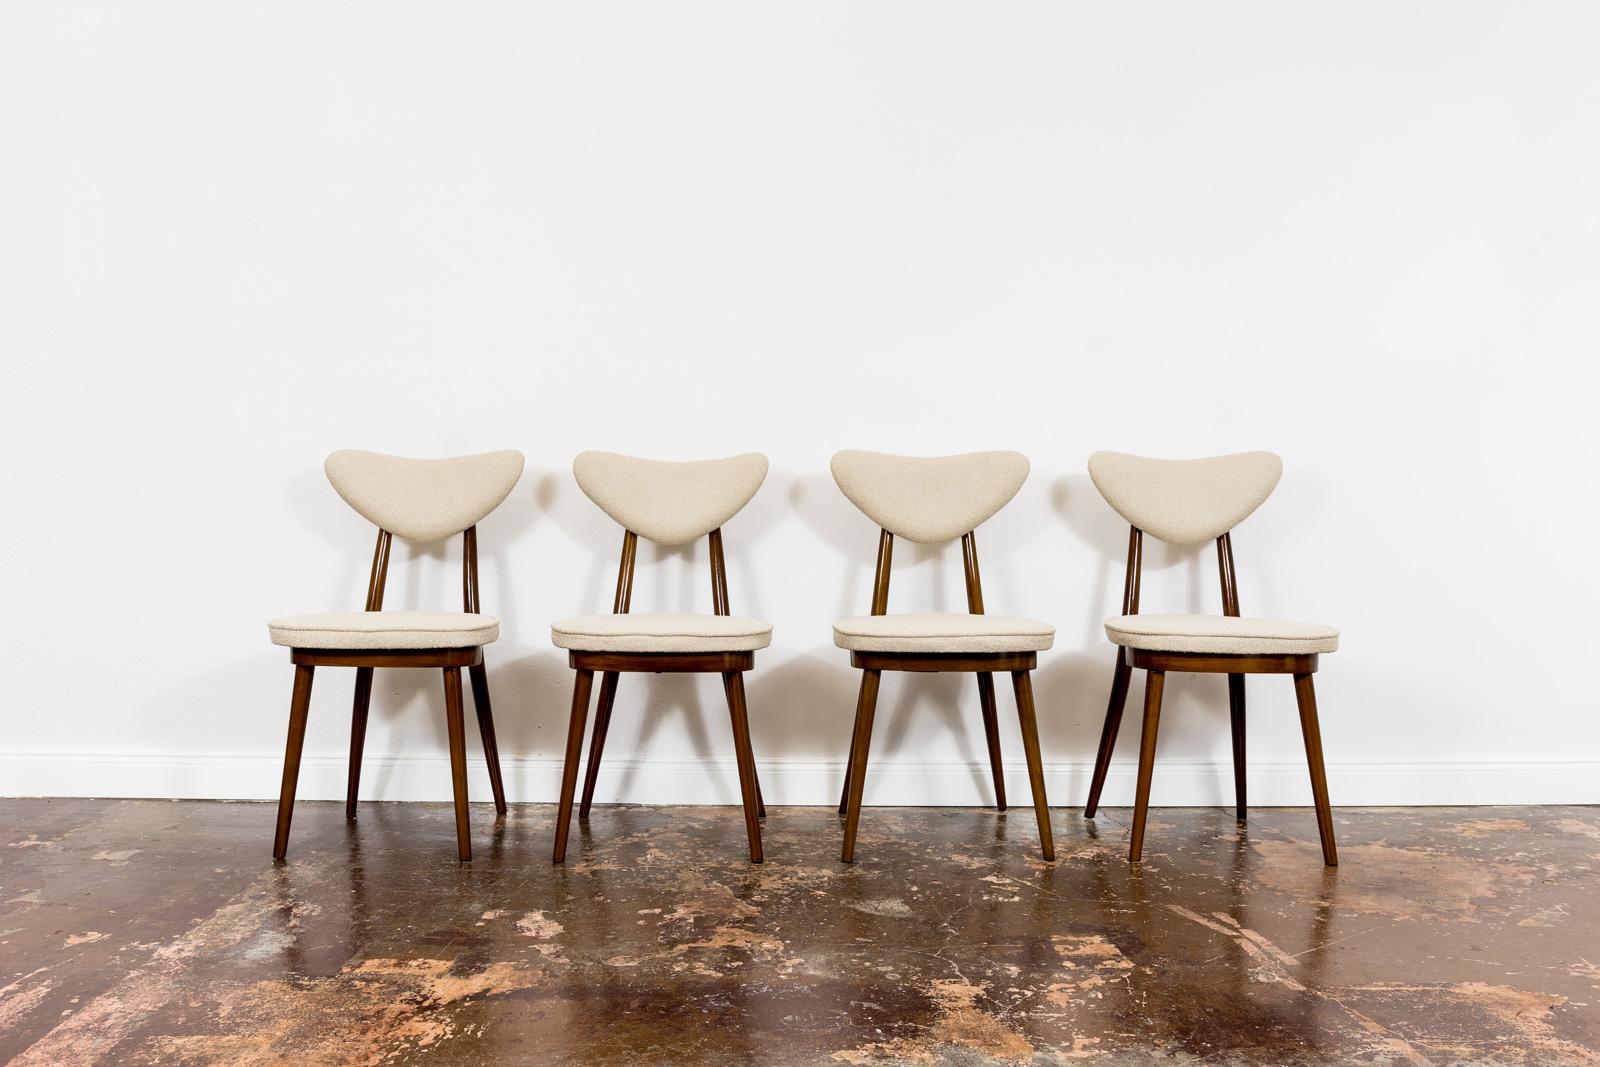 Set of 4 Mid-Century bentwood chairs in beige bouclé by H & J Kurmanowicz, 1950s, 

Set of 4 mid-century 